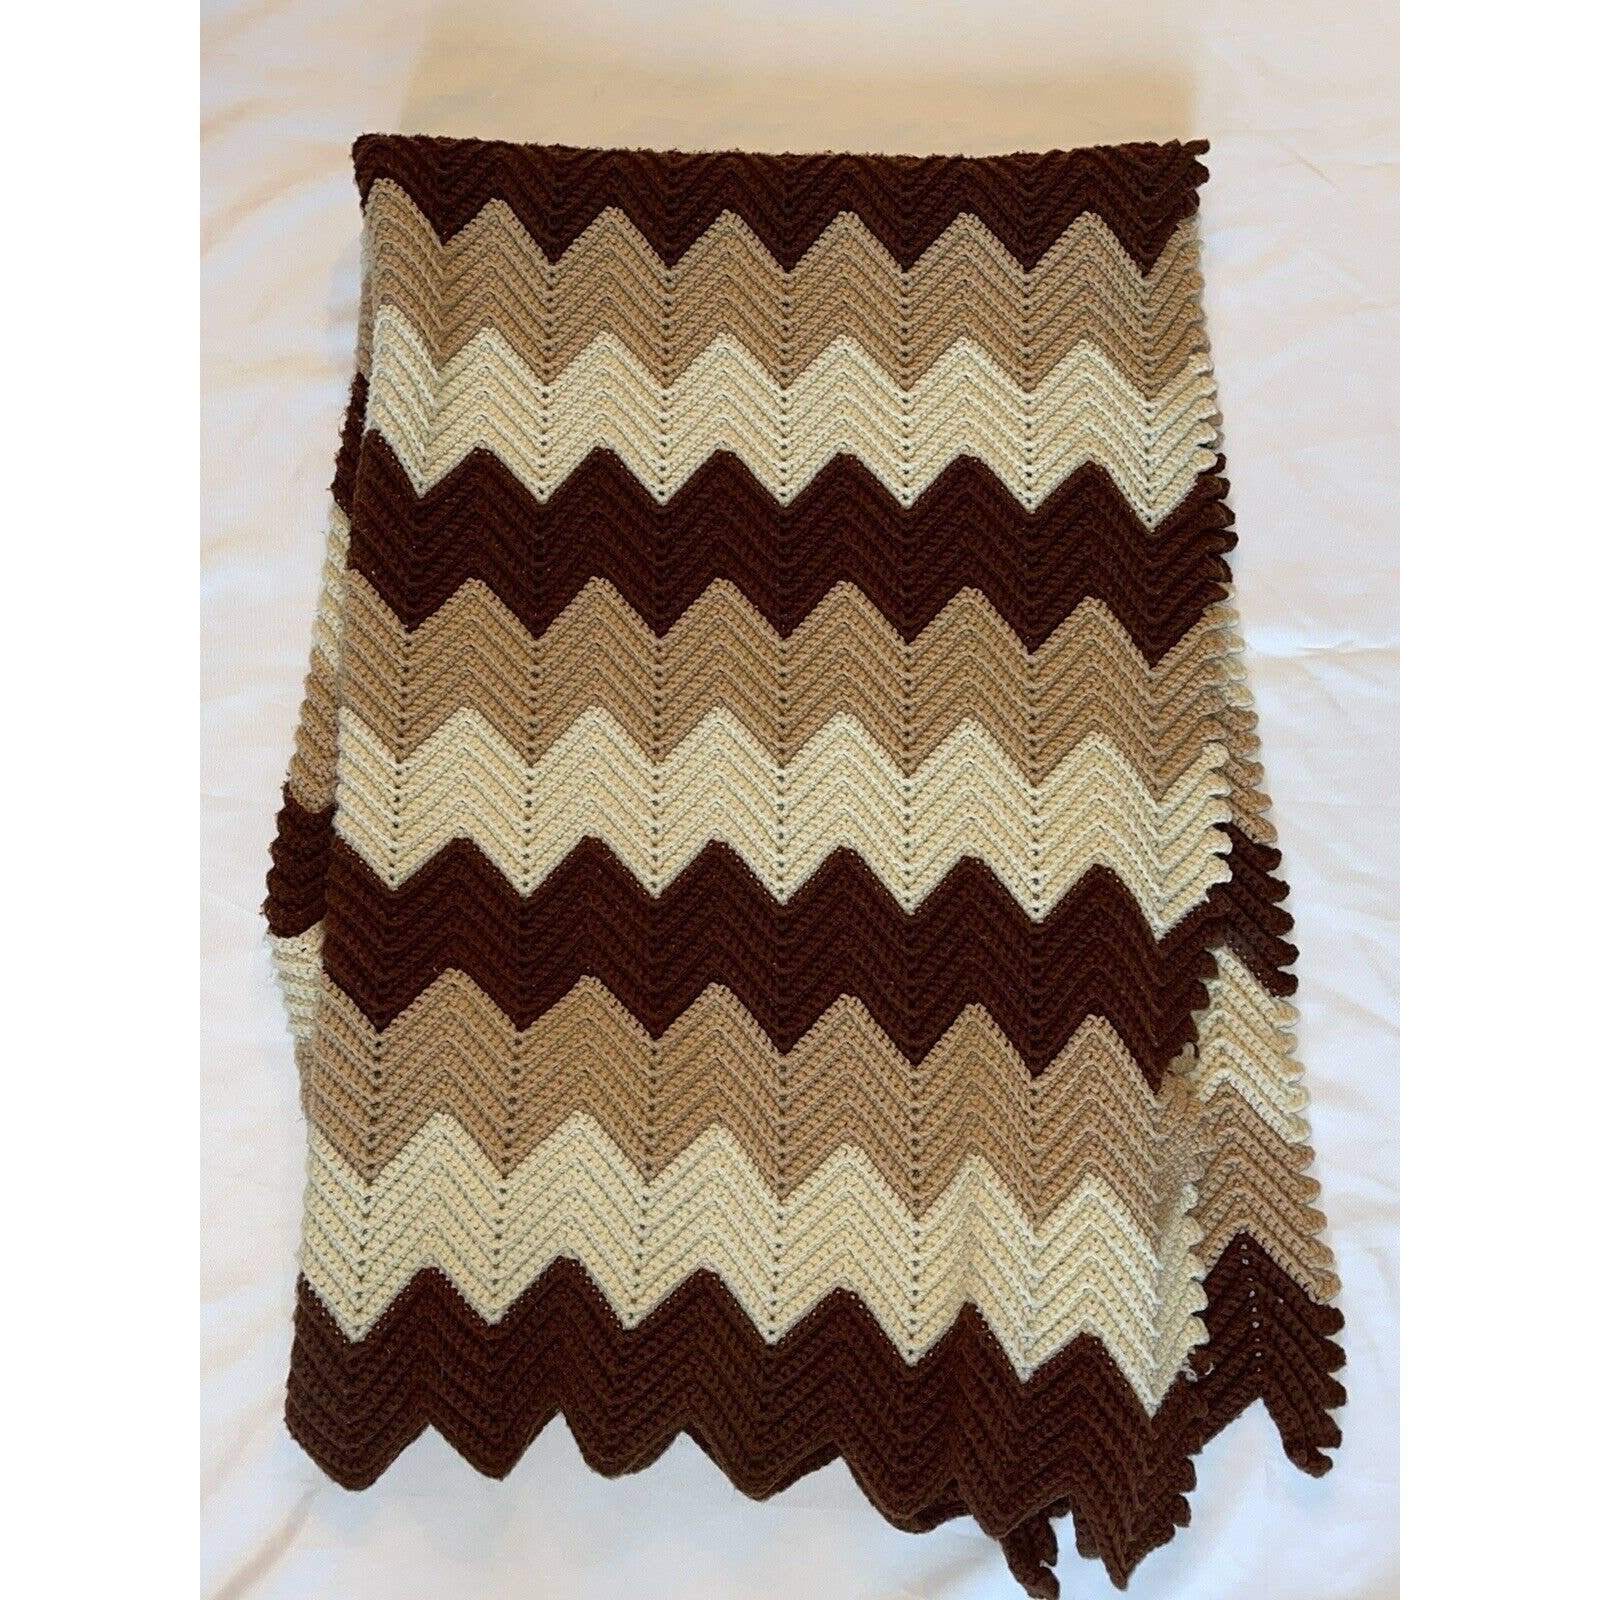 Vintage 1970s retro afghan, never used! Off white, Tan and browns 73”x 44” eS8vdk8tY